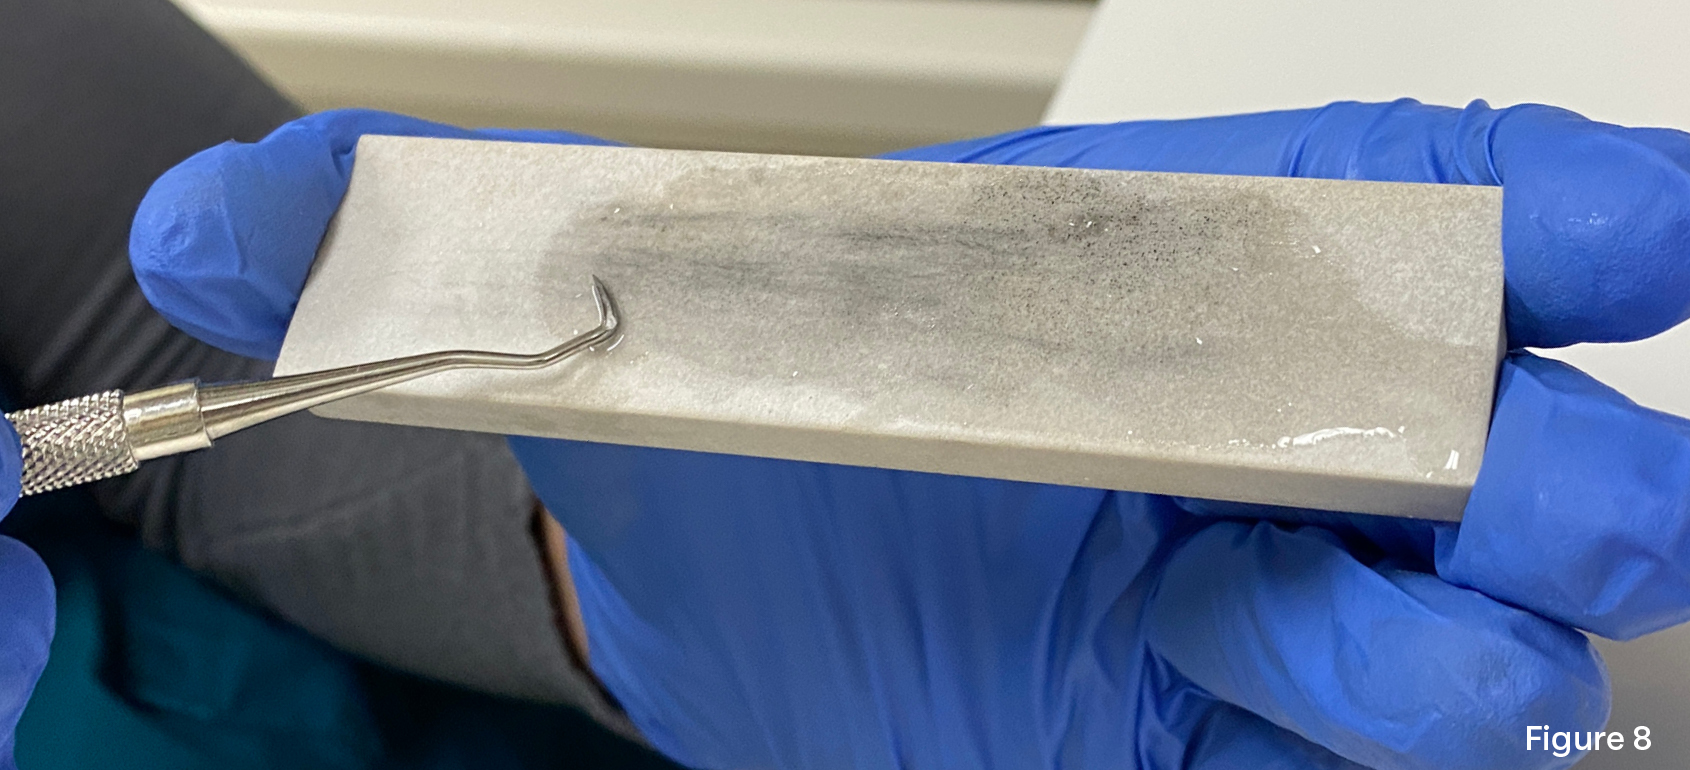 Image showing a curved curette on a sharpening stone